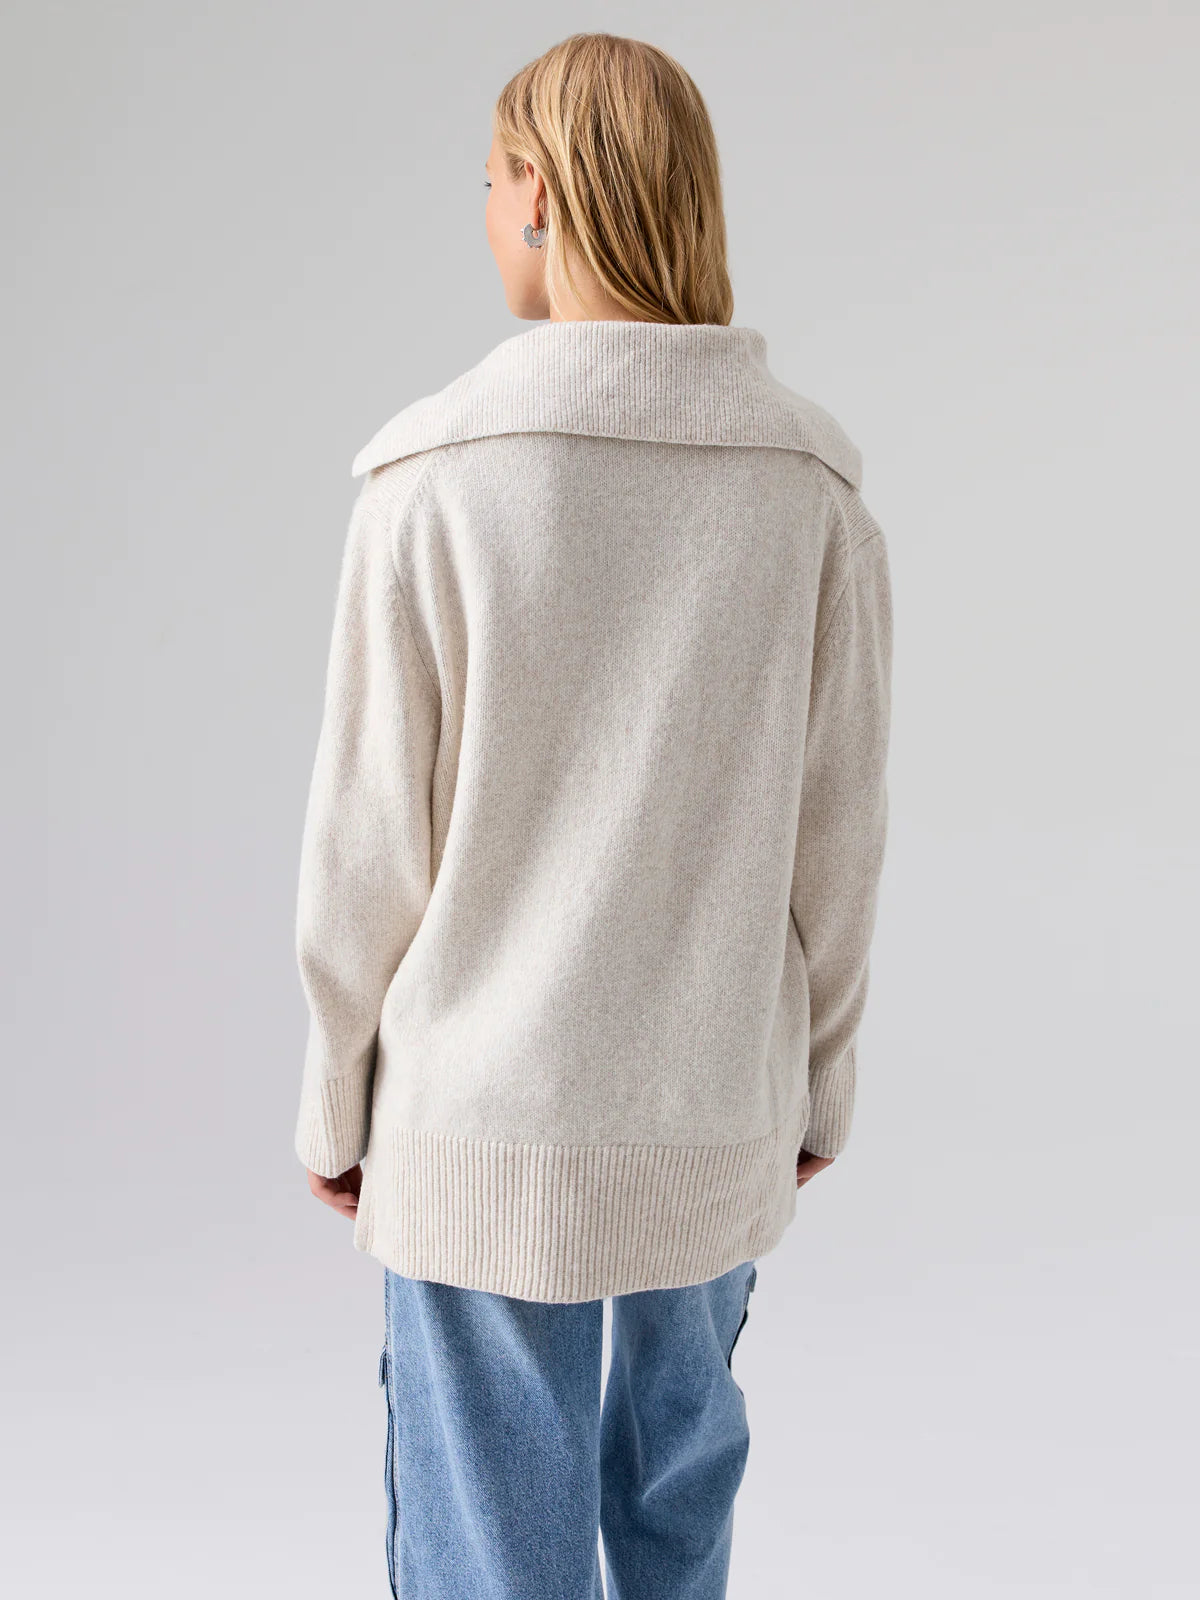 Endless Winters Sweater Toasted Marshmallow